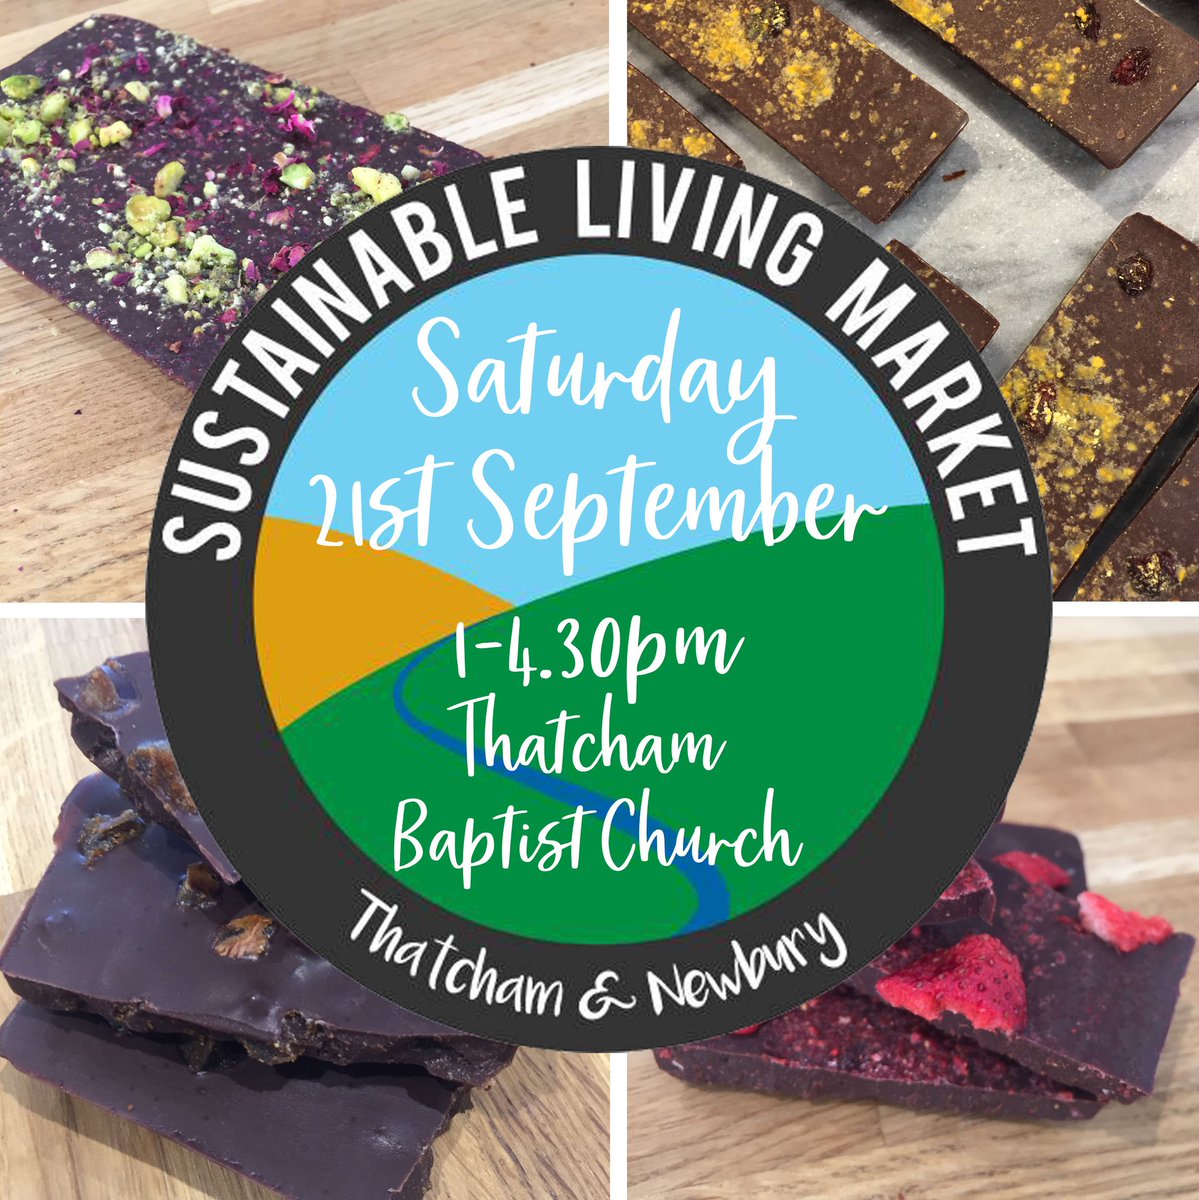 We have a double event again this Saturday, kicking off with Sustainable Living Market - Thatcham & Newbury

#sustainableliving #sustainablethatcham #sustainablenewbury #sustainablemarket